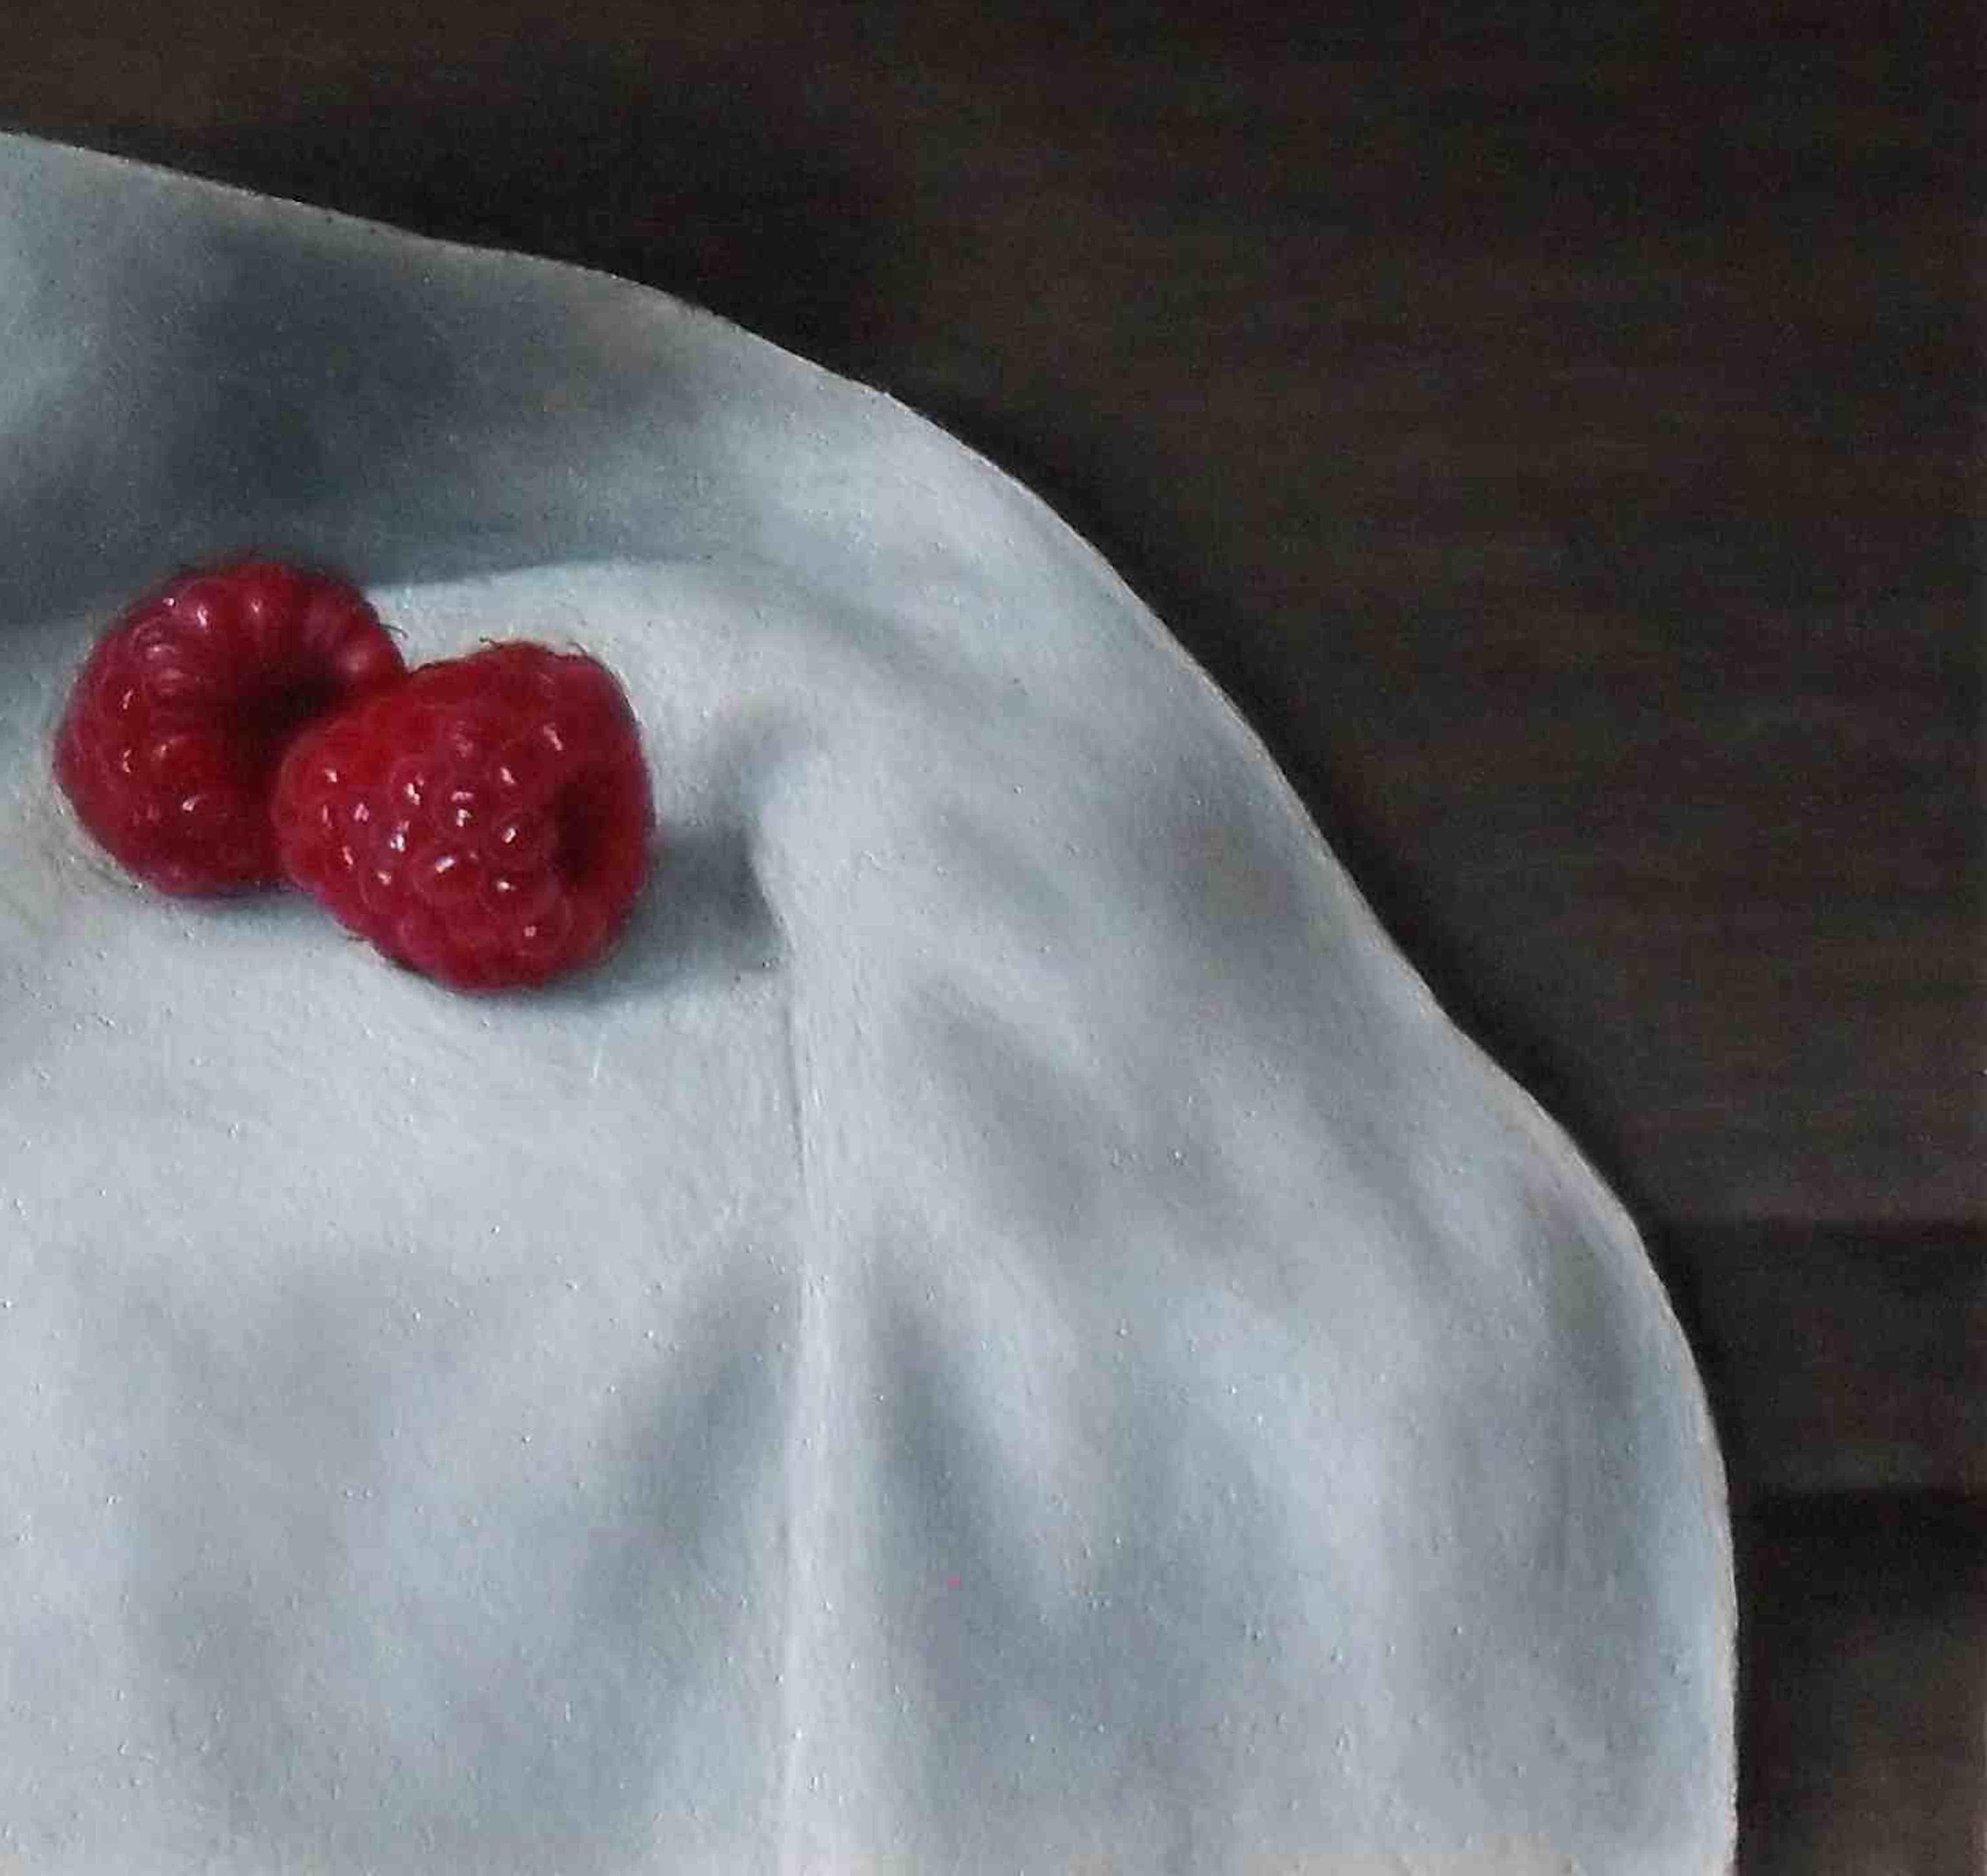 'Raspberries in a Bowl' by Barbara Vanhove is a 20th Century  Photo-realist still-life painting.

Barbara was born in Watermael-Boisfort in Belgium in 1974. She showed an incredible natural talent early on in her life and after school she studied